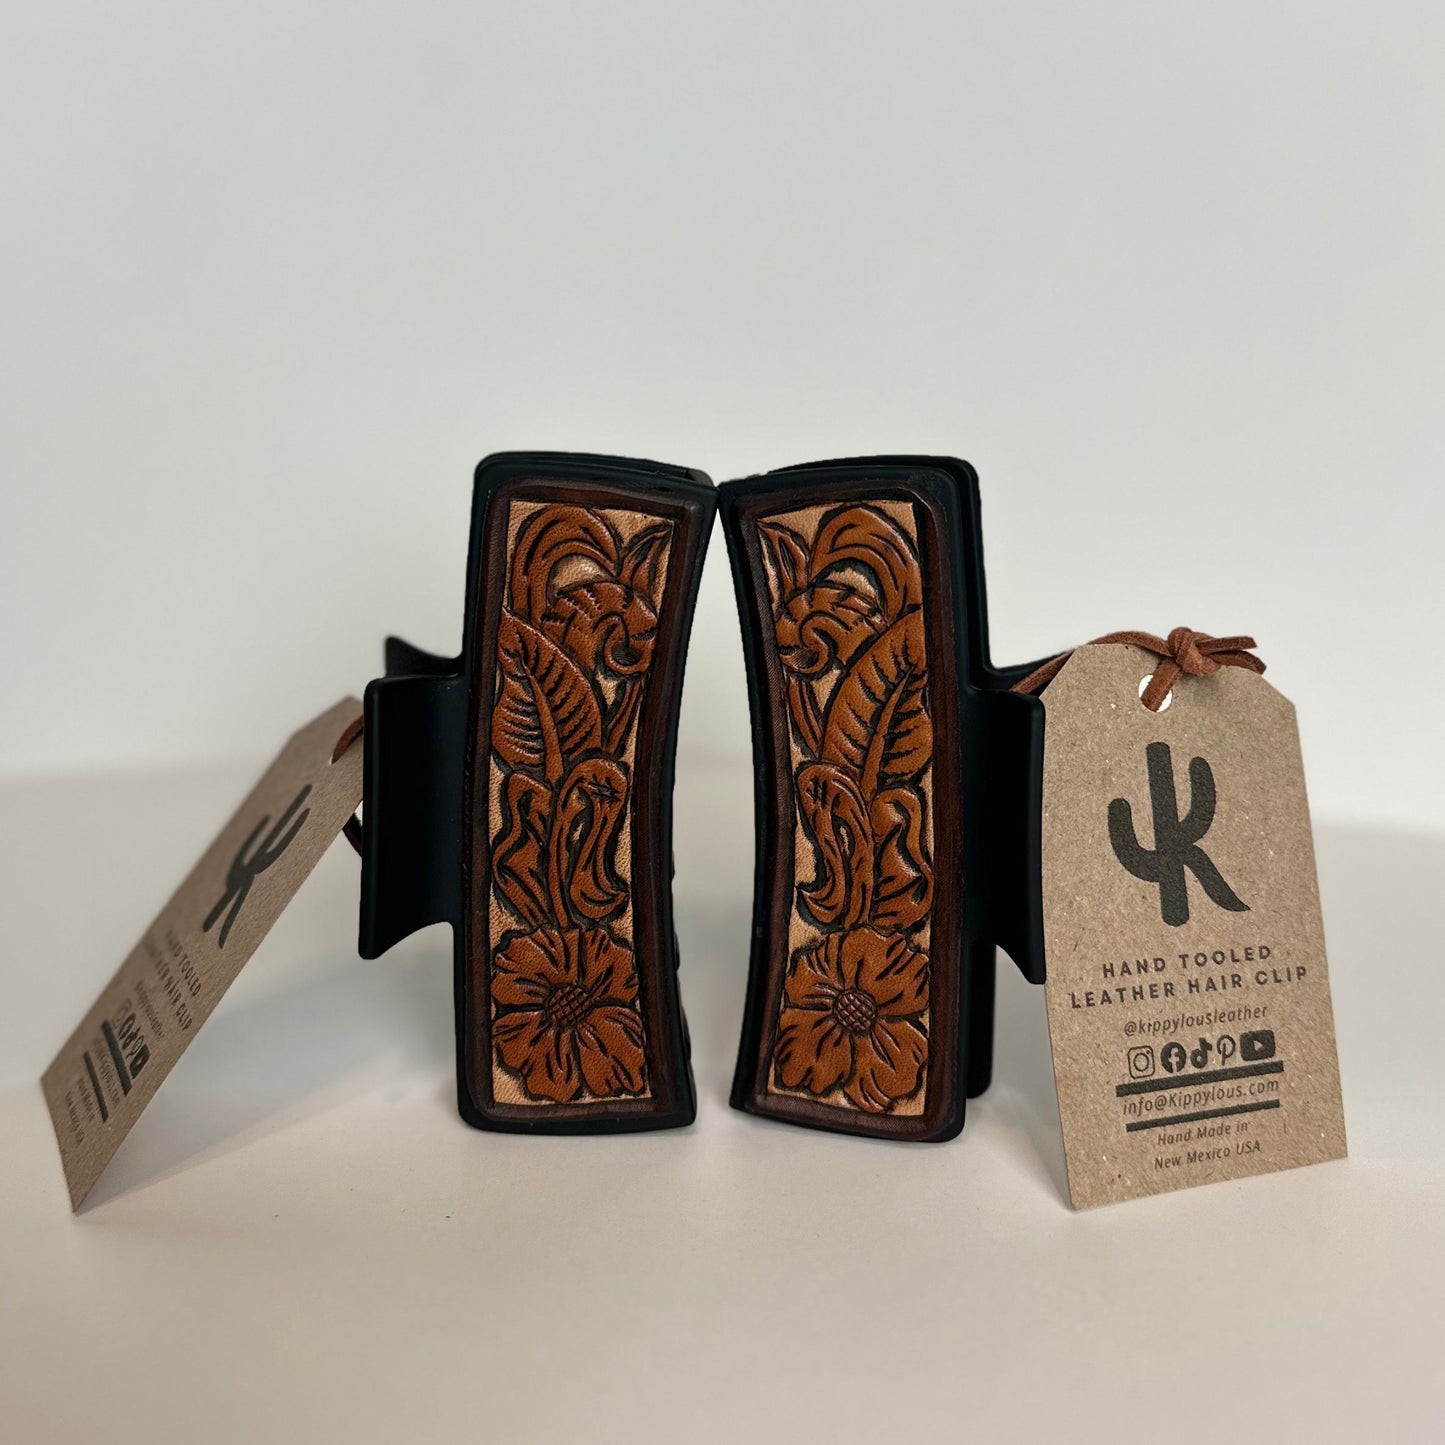 Hand Tooled Leather Hair Clip